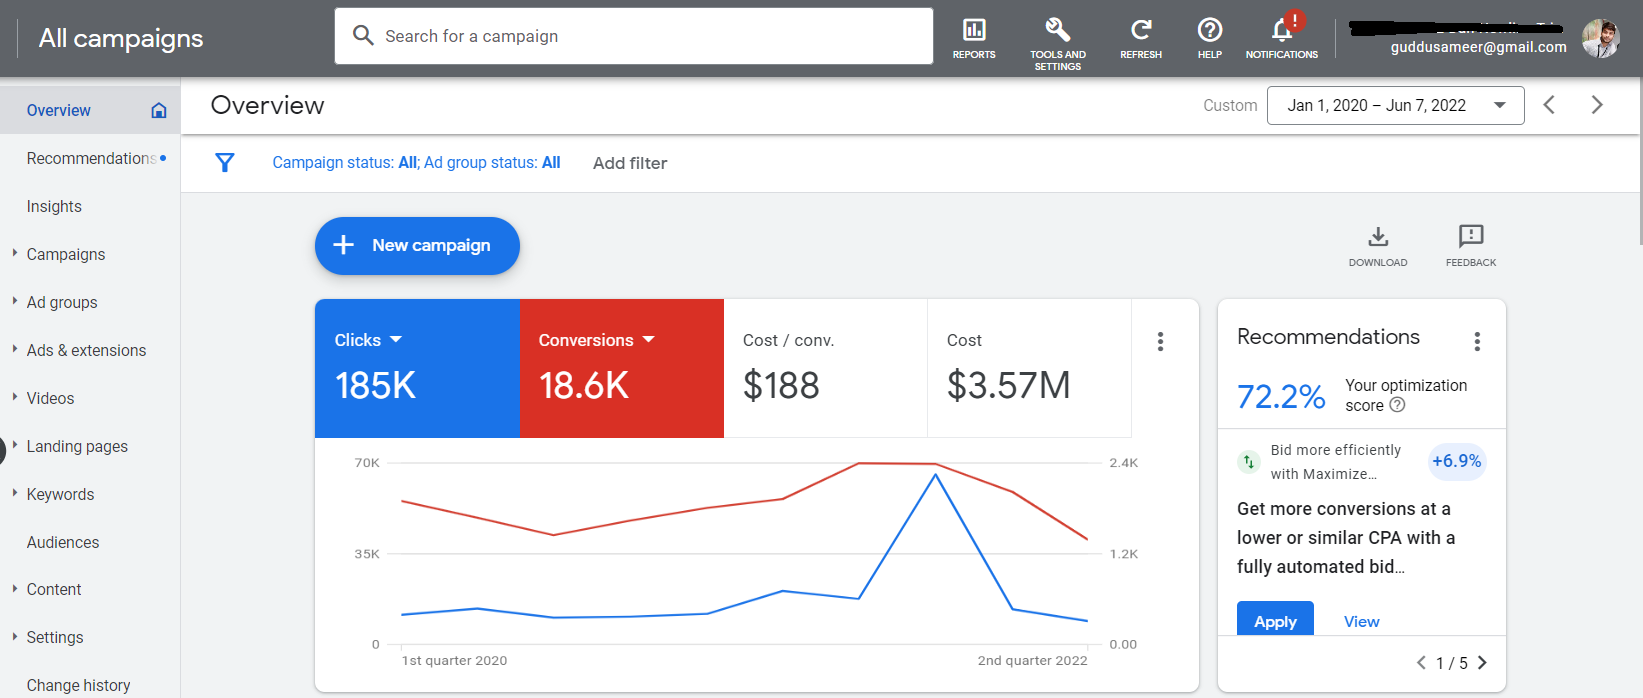 Lawyer PPC Agency - $3.57M Budget Spent on Google Ads for lawyer client